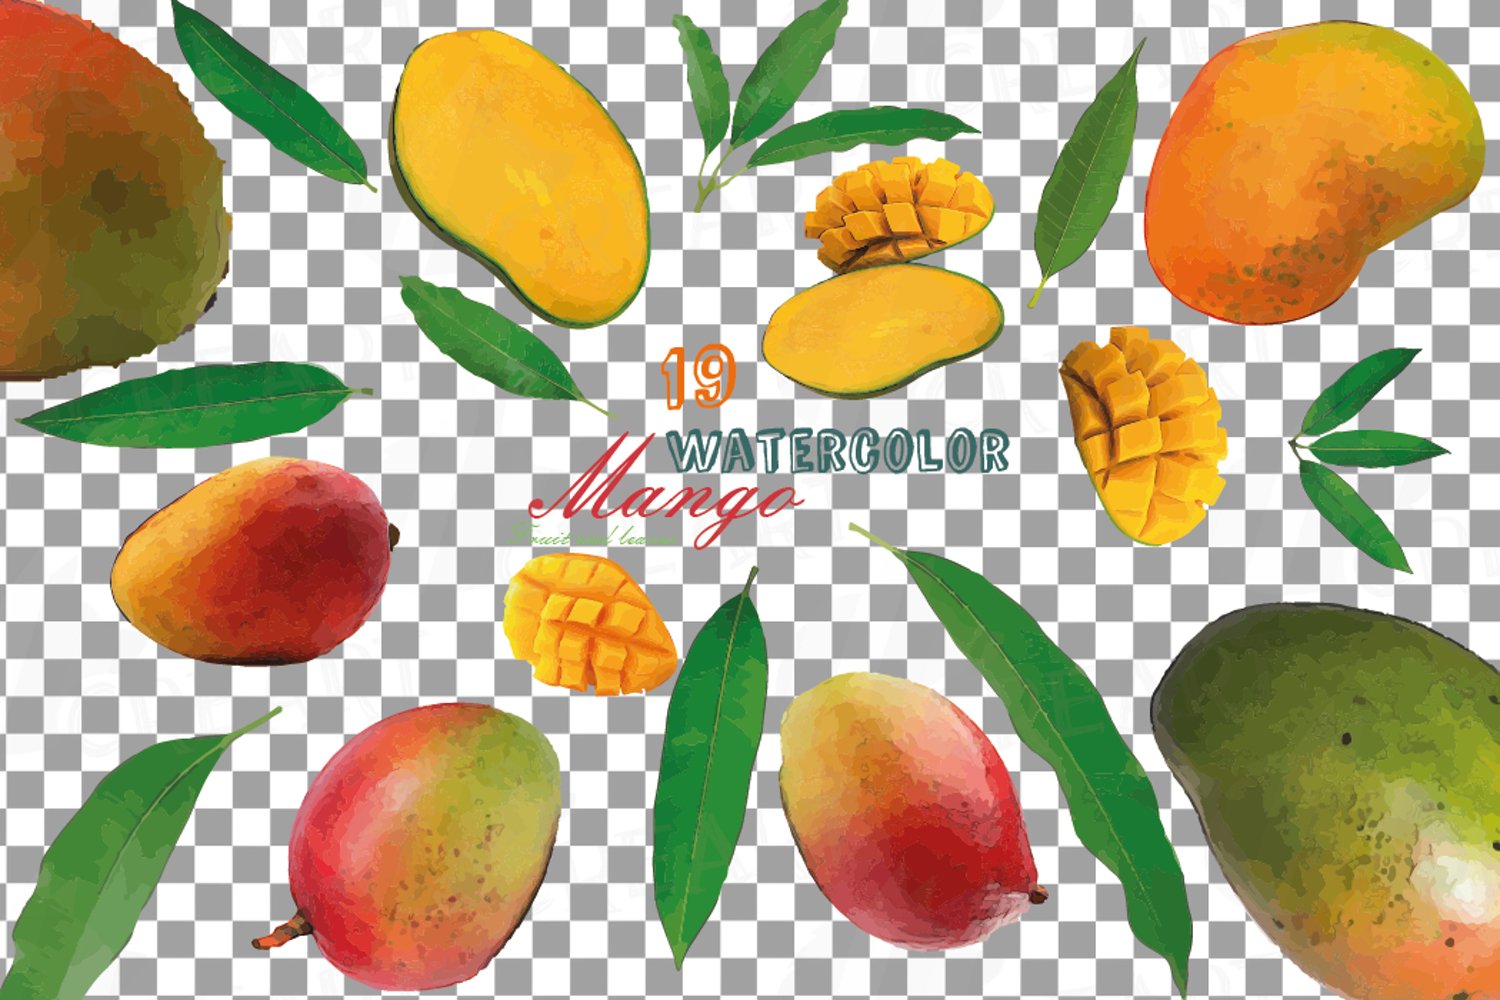 Watercolor Mango leaves and fruits clip art pack comes with 19 different watercolor set element.